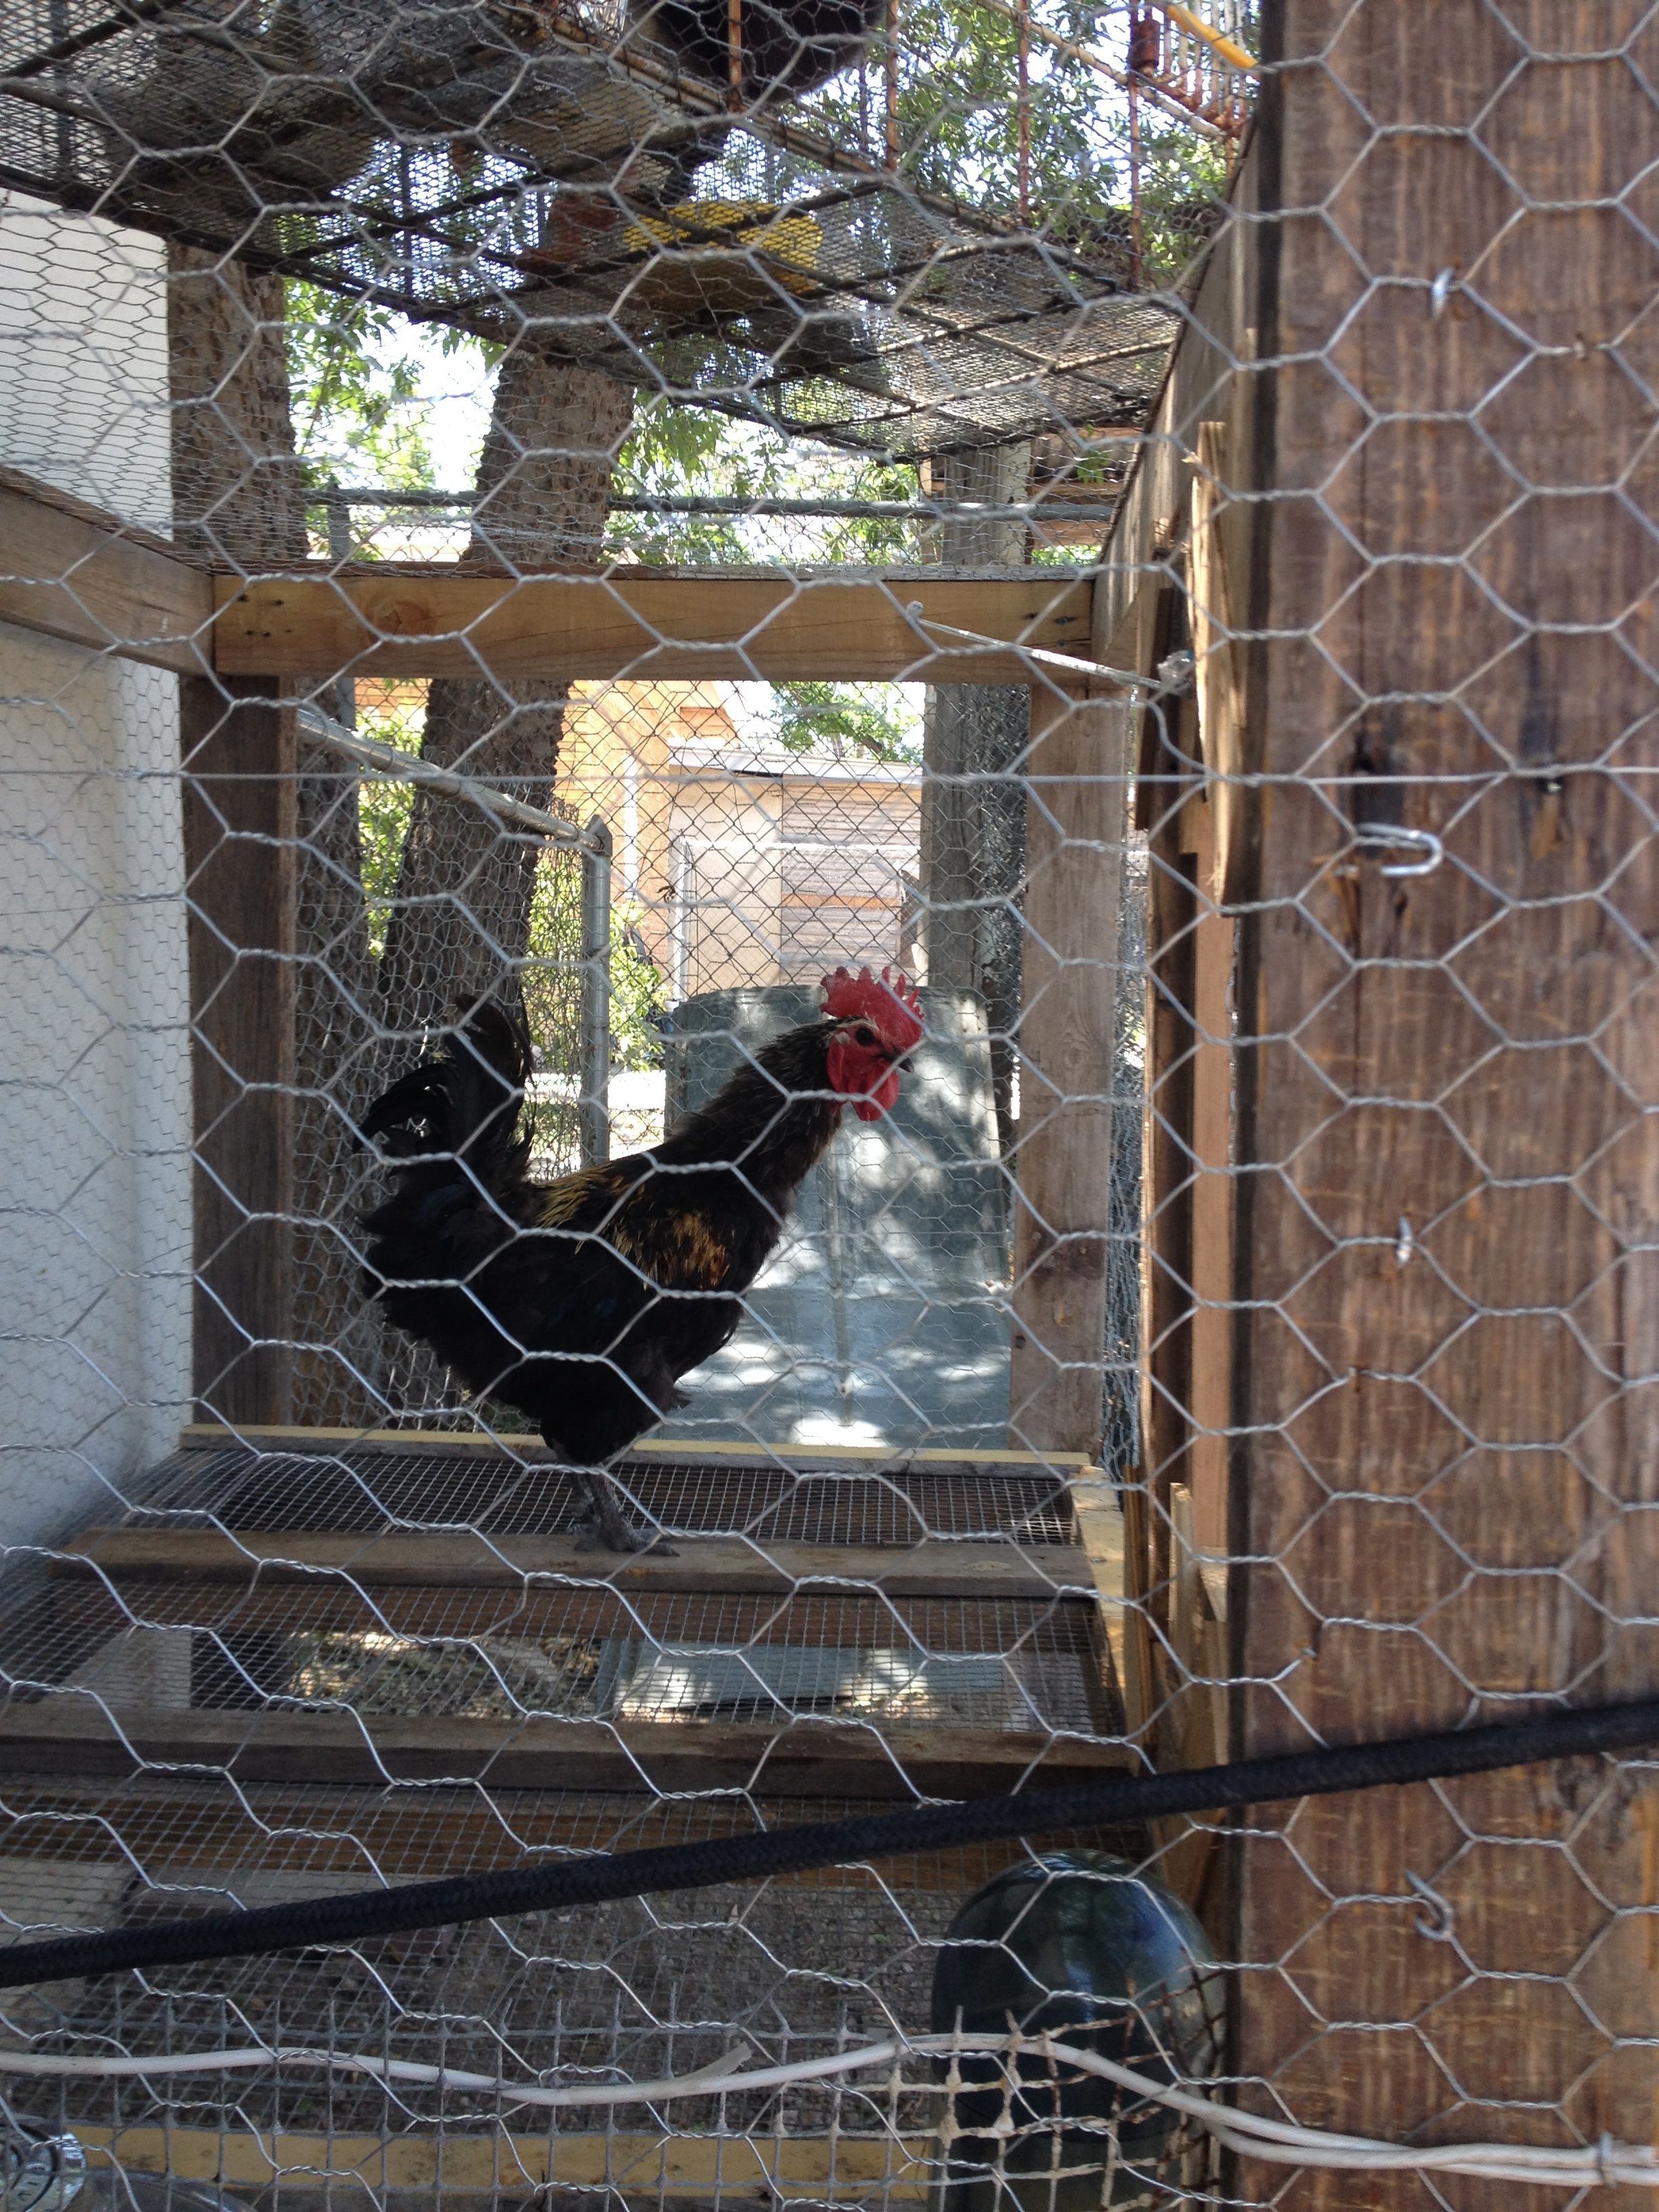 A new addition, Mr Rooster